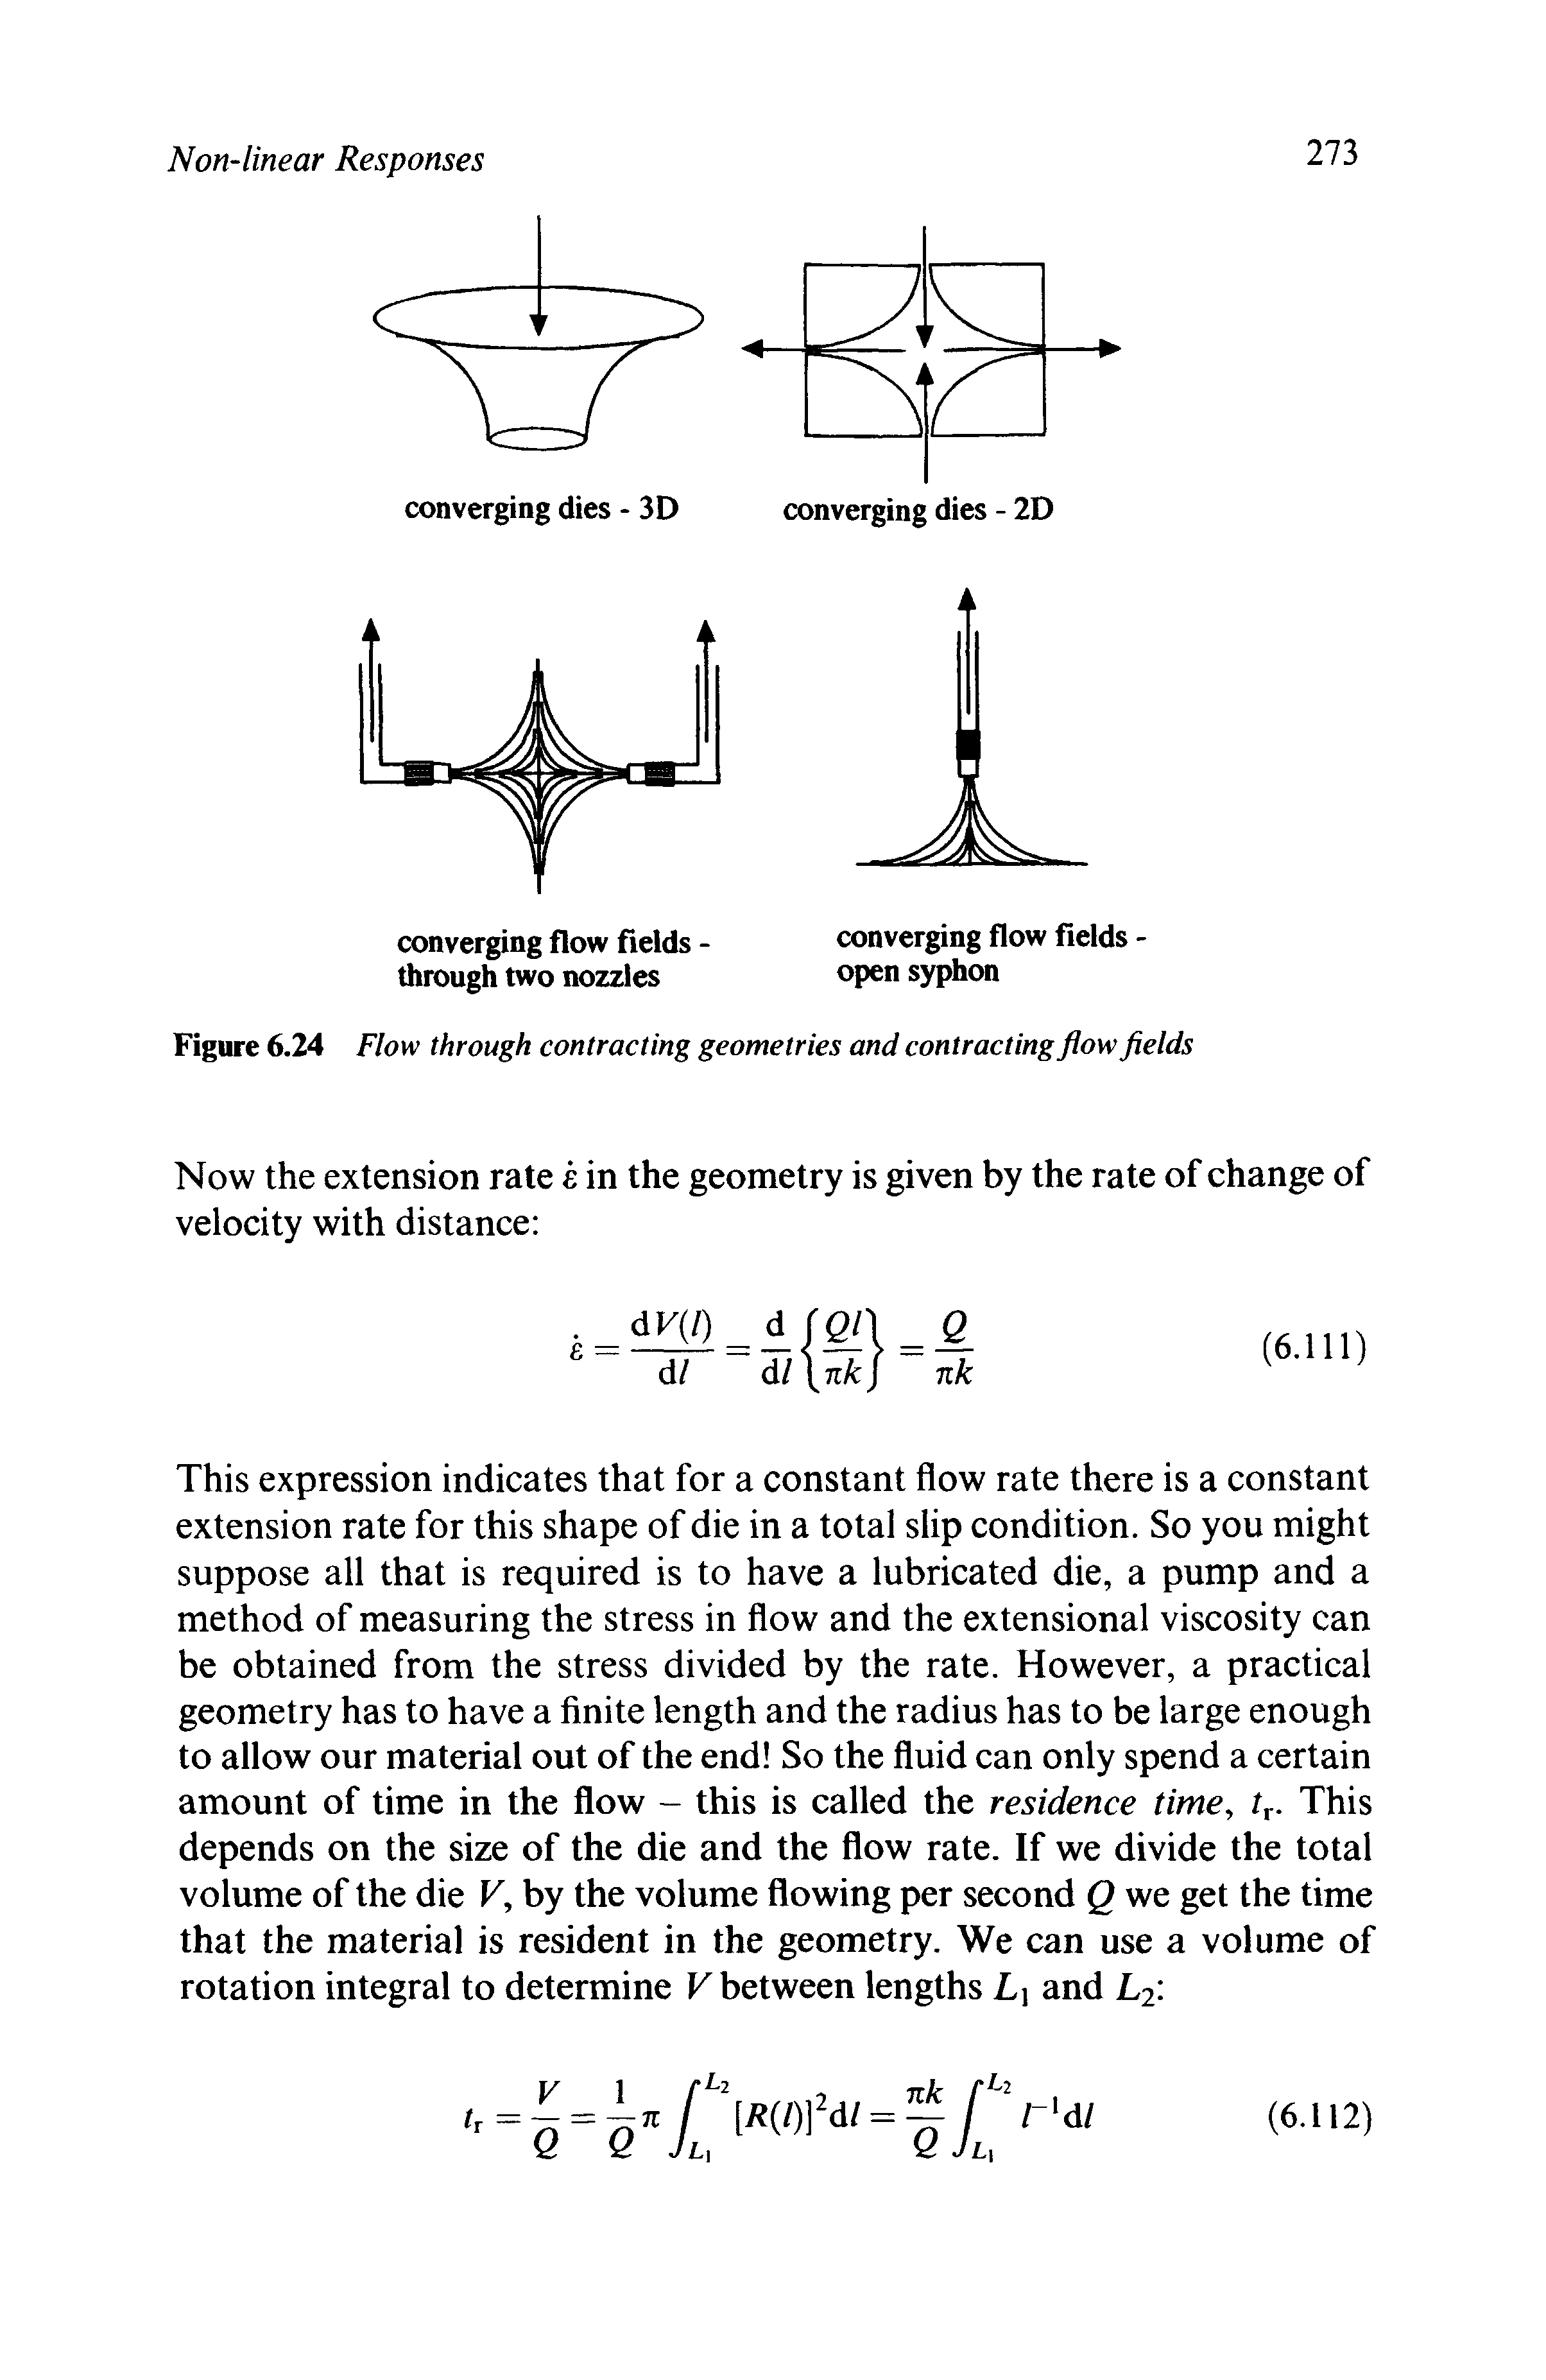 Figure 6.24 Flow through contracting geometries and contracting flow fields...